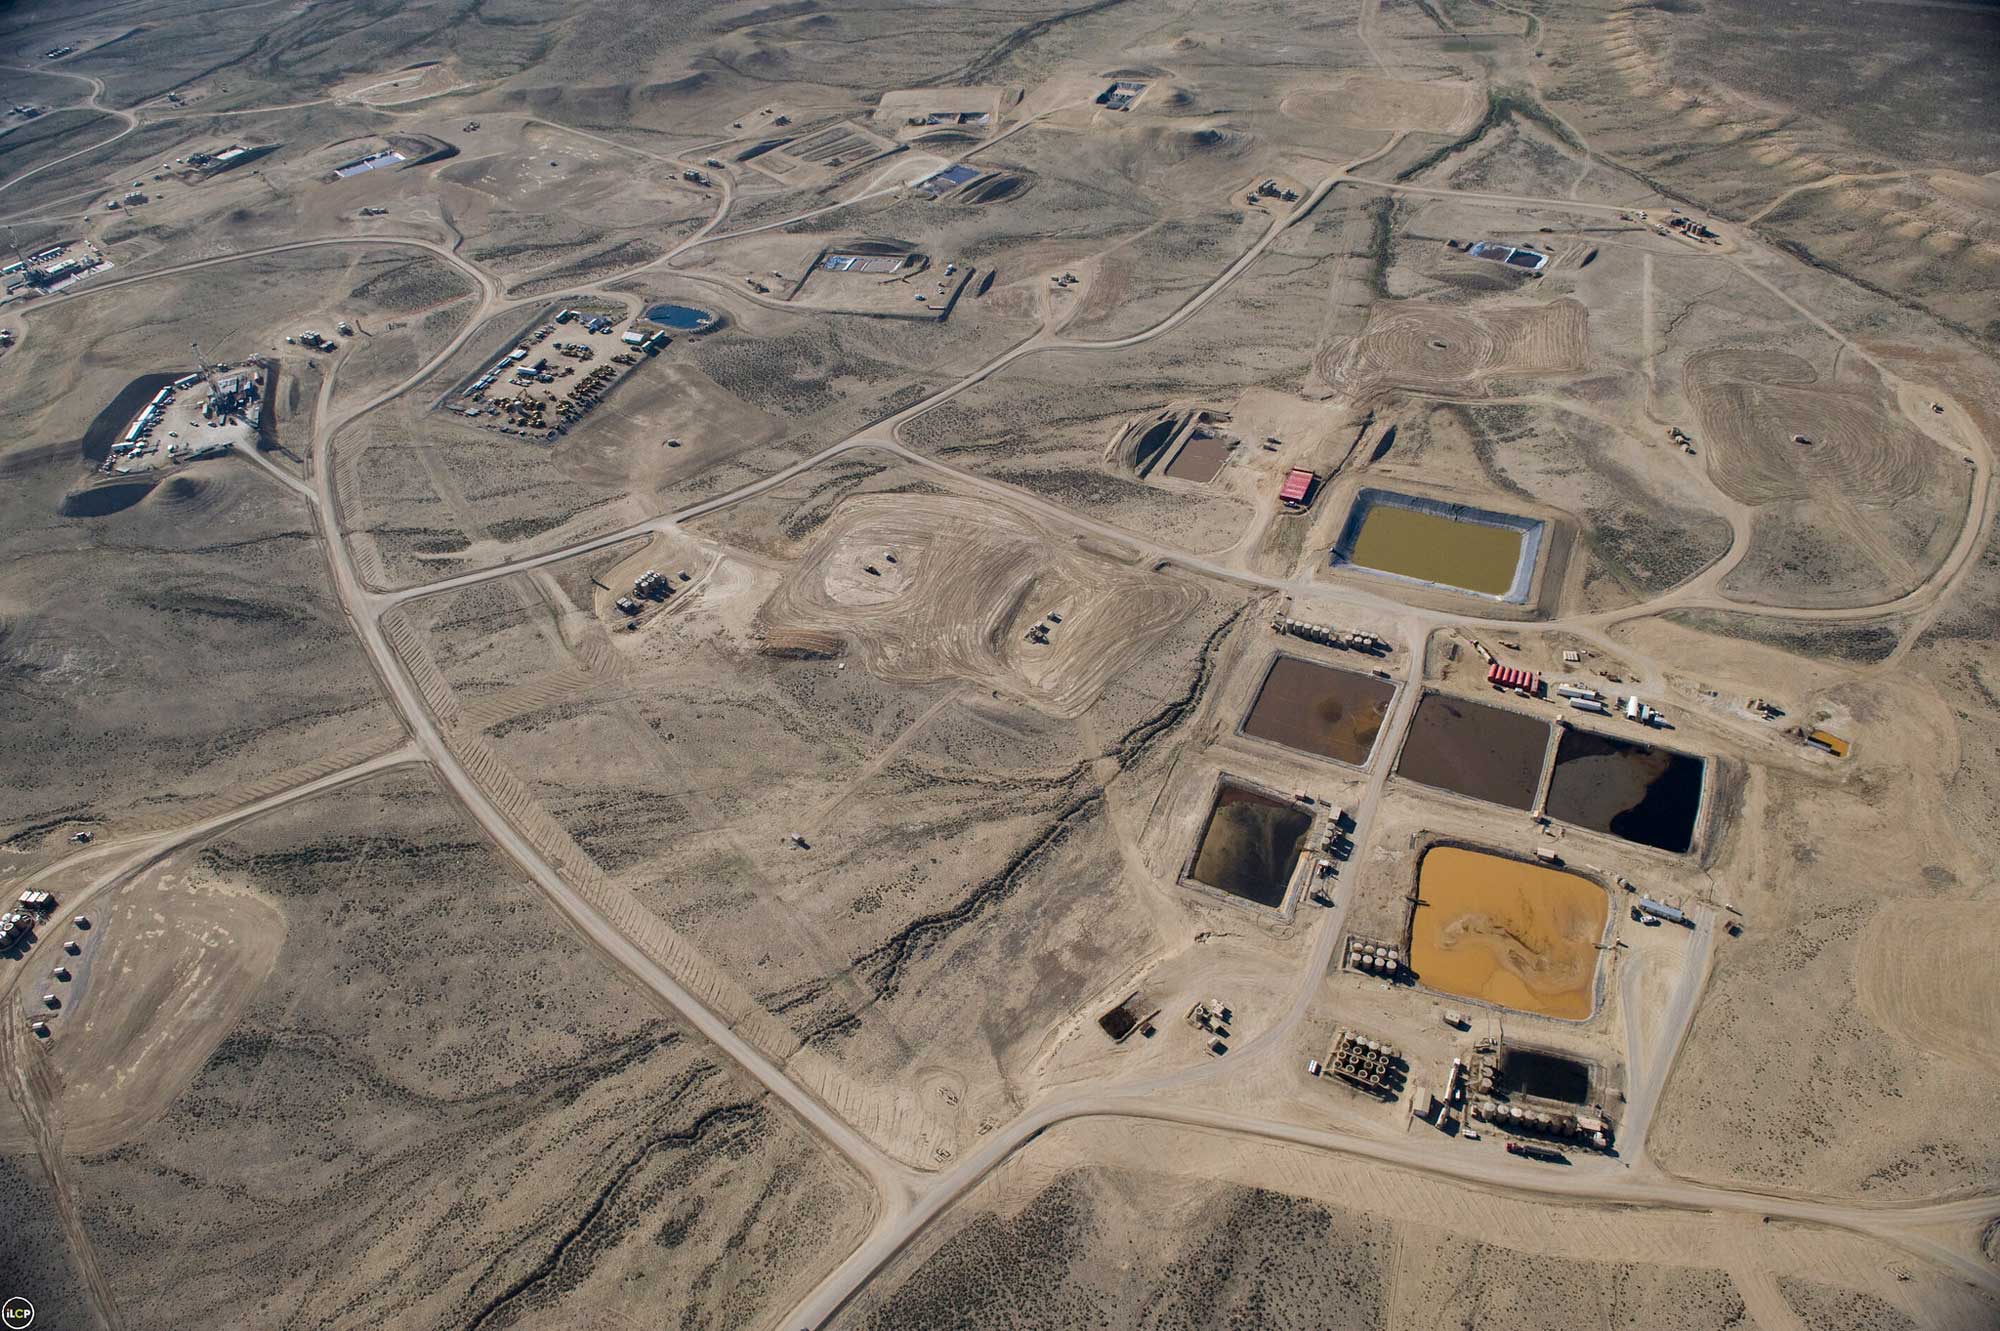 Aerial photograph of the Pinedale Anticline Natural Gas Field, Wyoming. The photo shows a brown landscape with a network of roads and oil well drilling pads. In the foreground at right, a series of square to rectangular waste pits can be seen. The pits are open to the air and hold green, orange, and brown liquids.